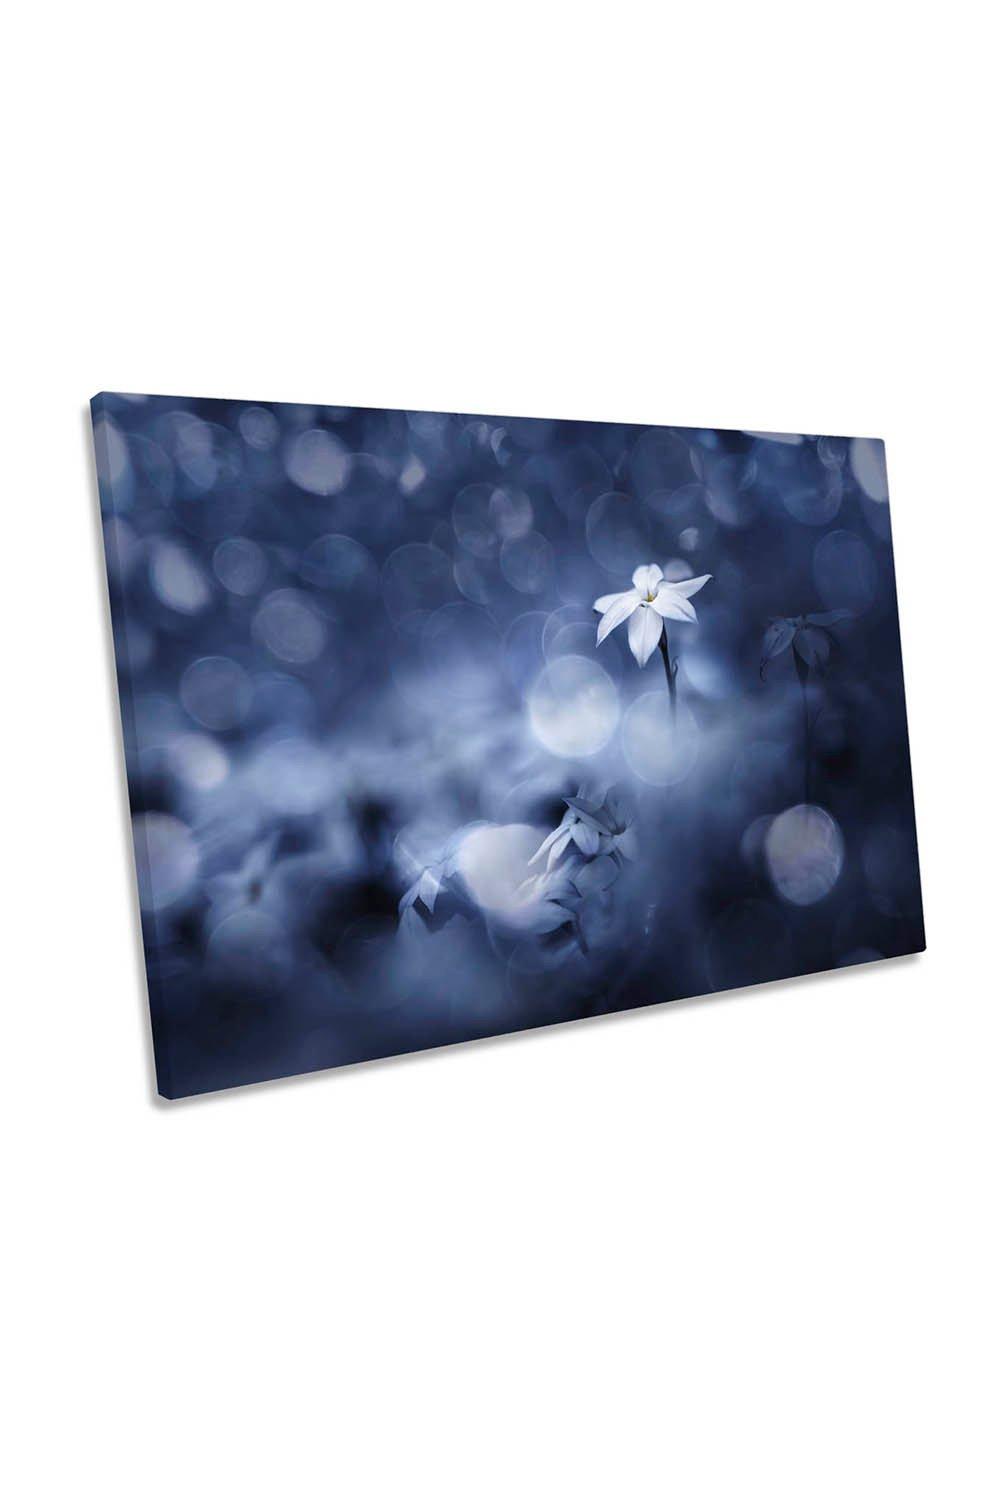 Sparkling Blue Background Floral Flower Canvas Wall Art Picture Print